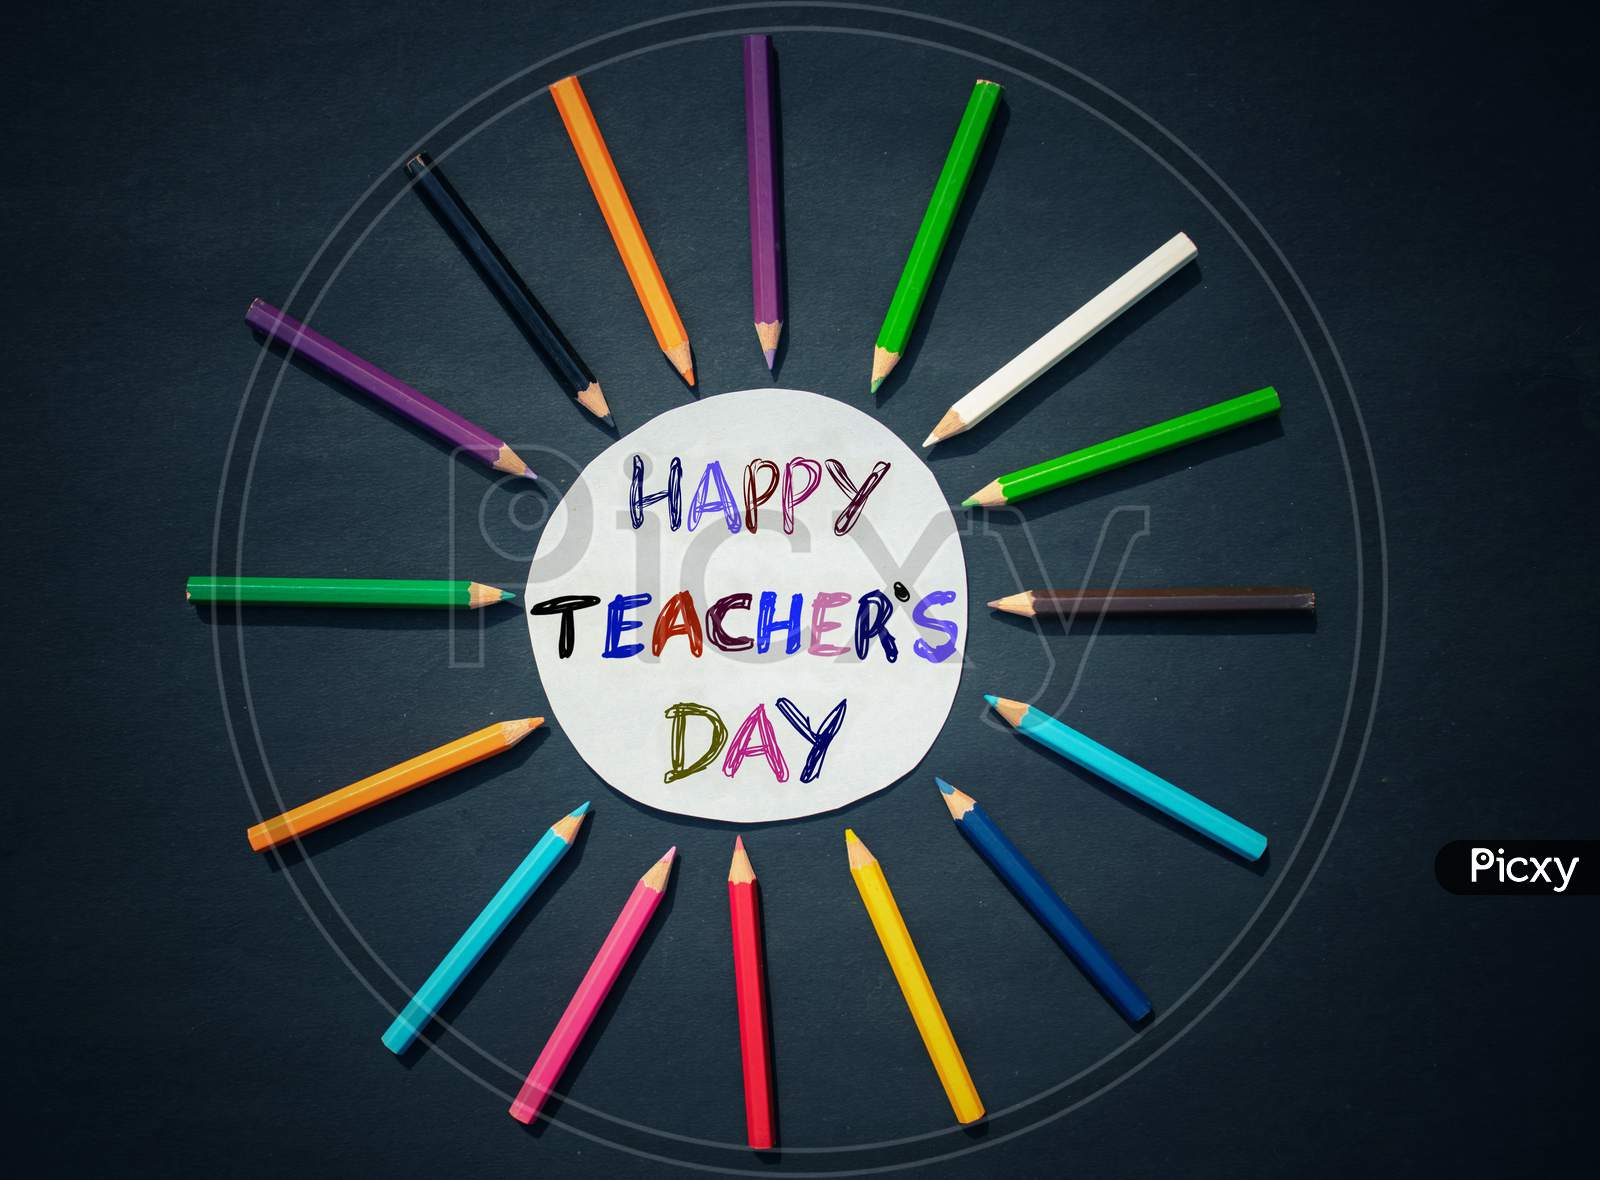 Happy Teacher's Day Creative Photo With Color Pencils On Black Background, Perfect For Wallpaper